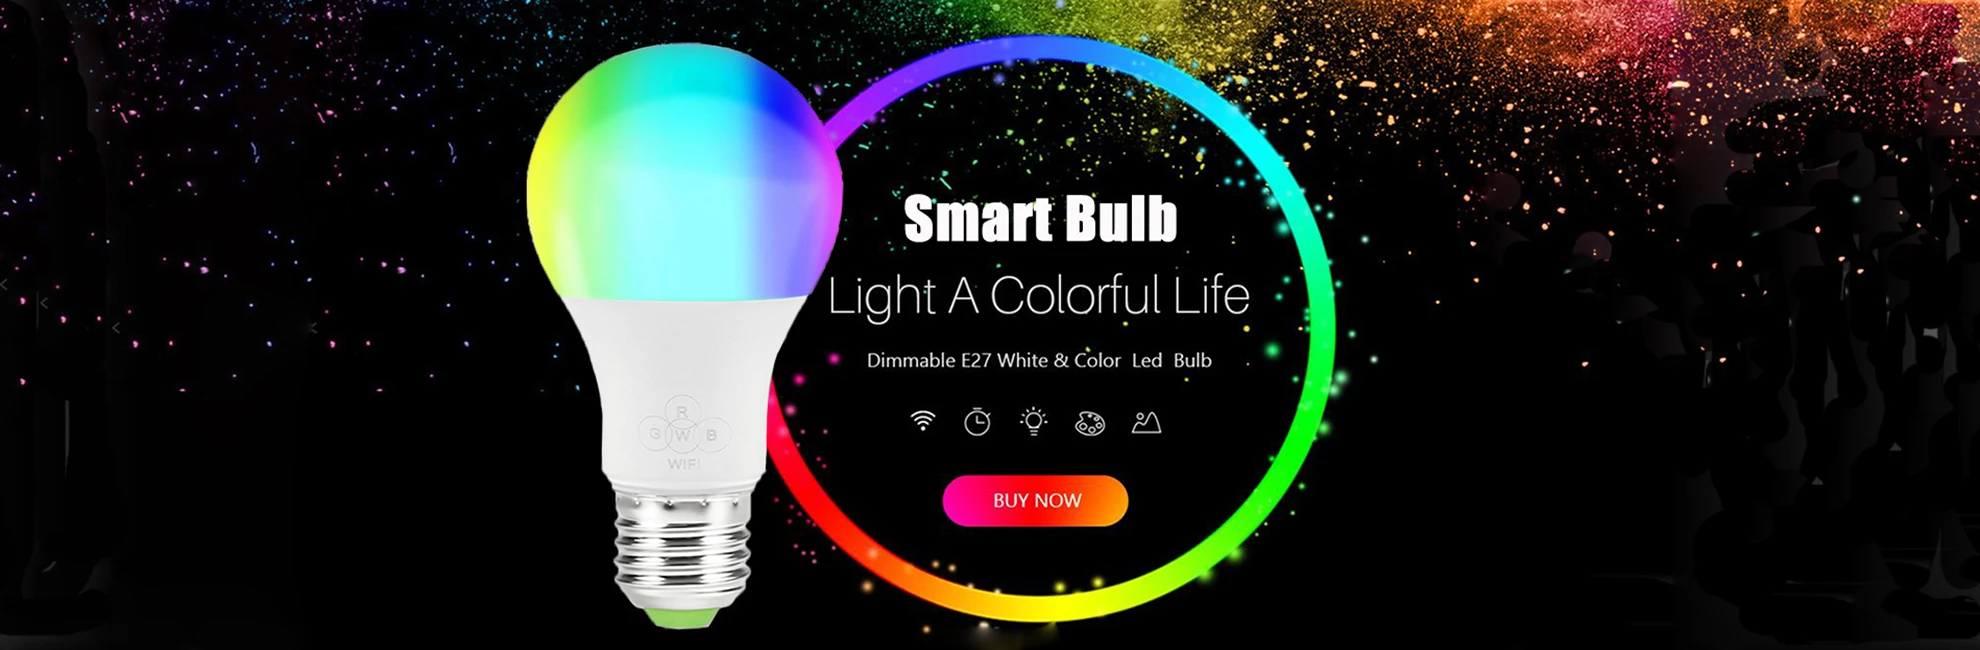 New Smart WiFi candle bulb light timing E14 RGB bulb wifi/voice Control home automation kit for Alexa/IFTTT/Google Home